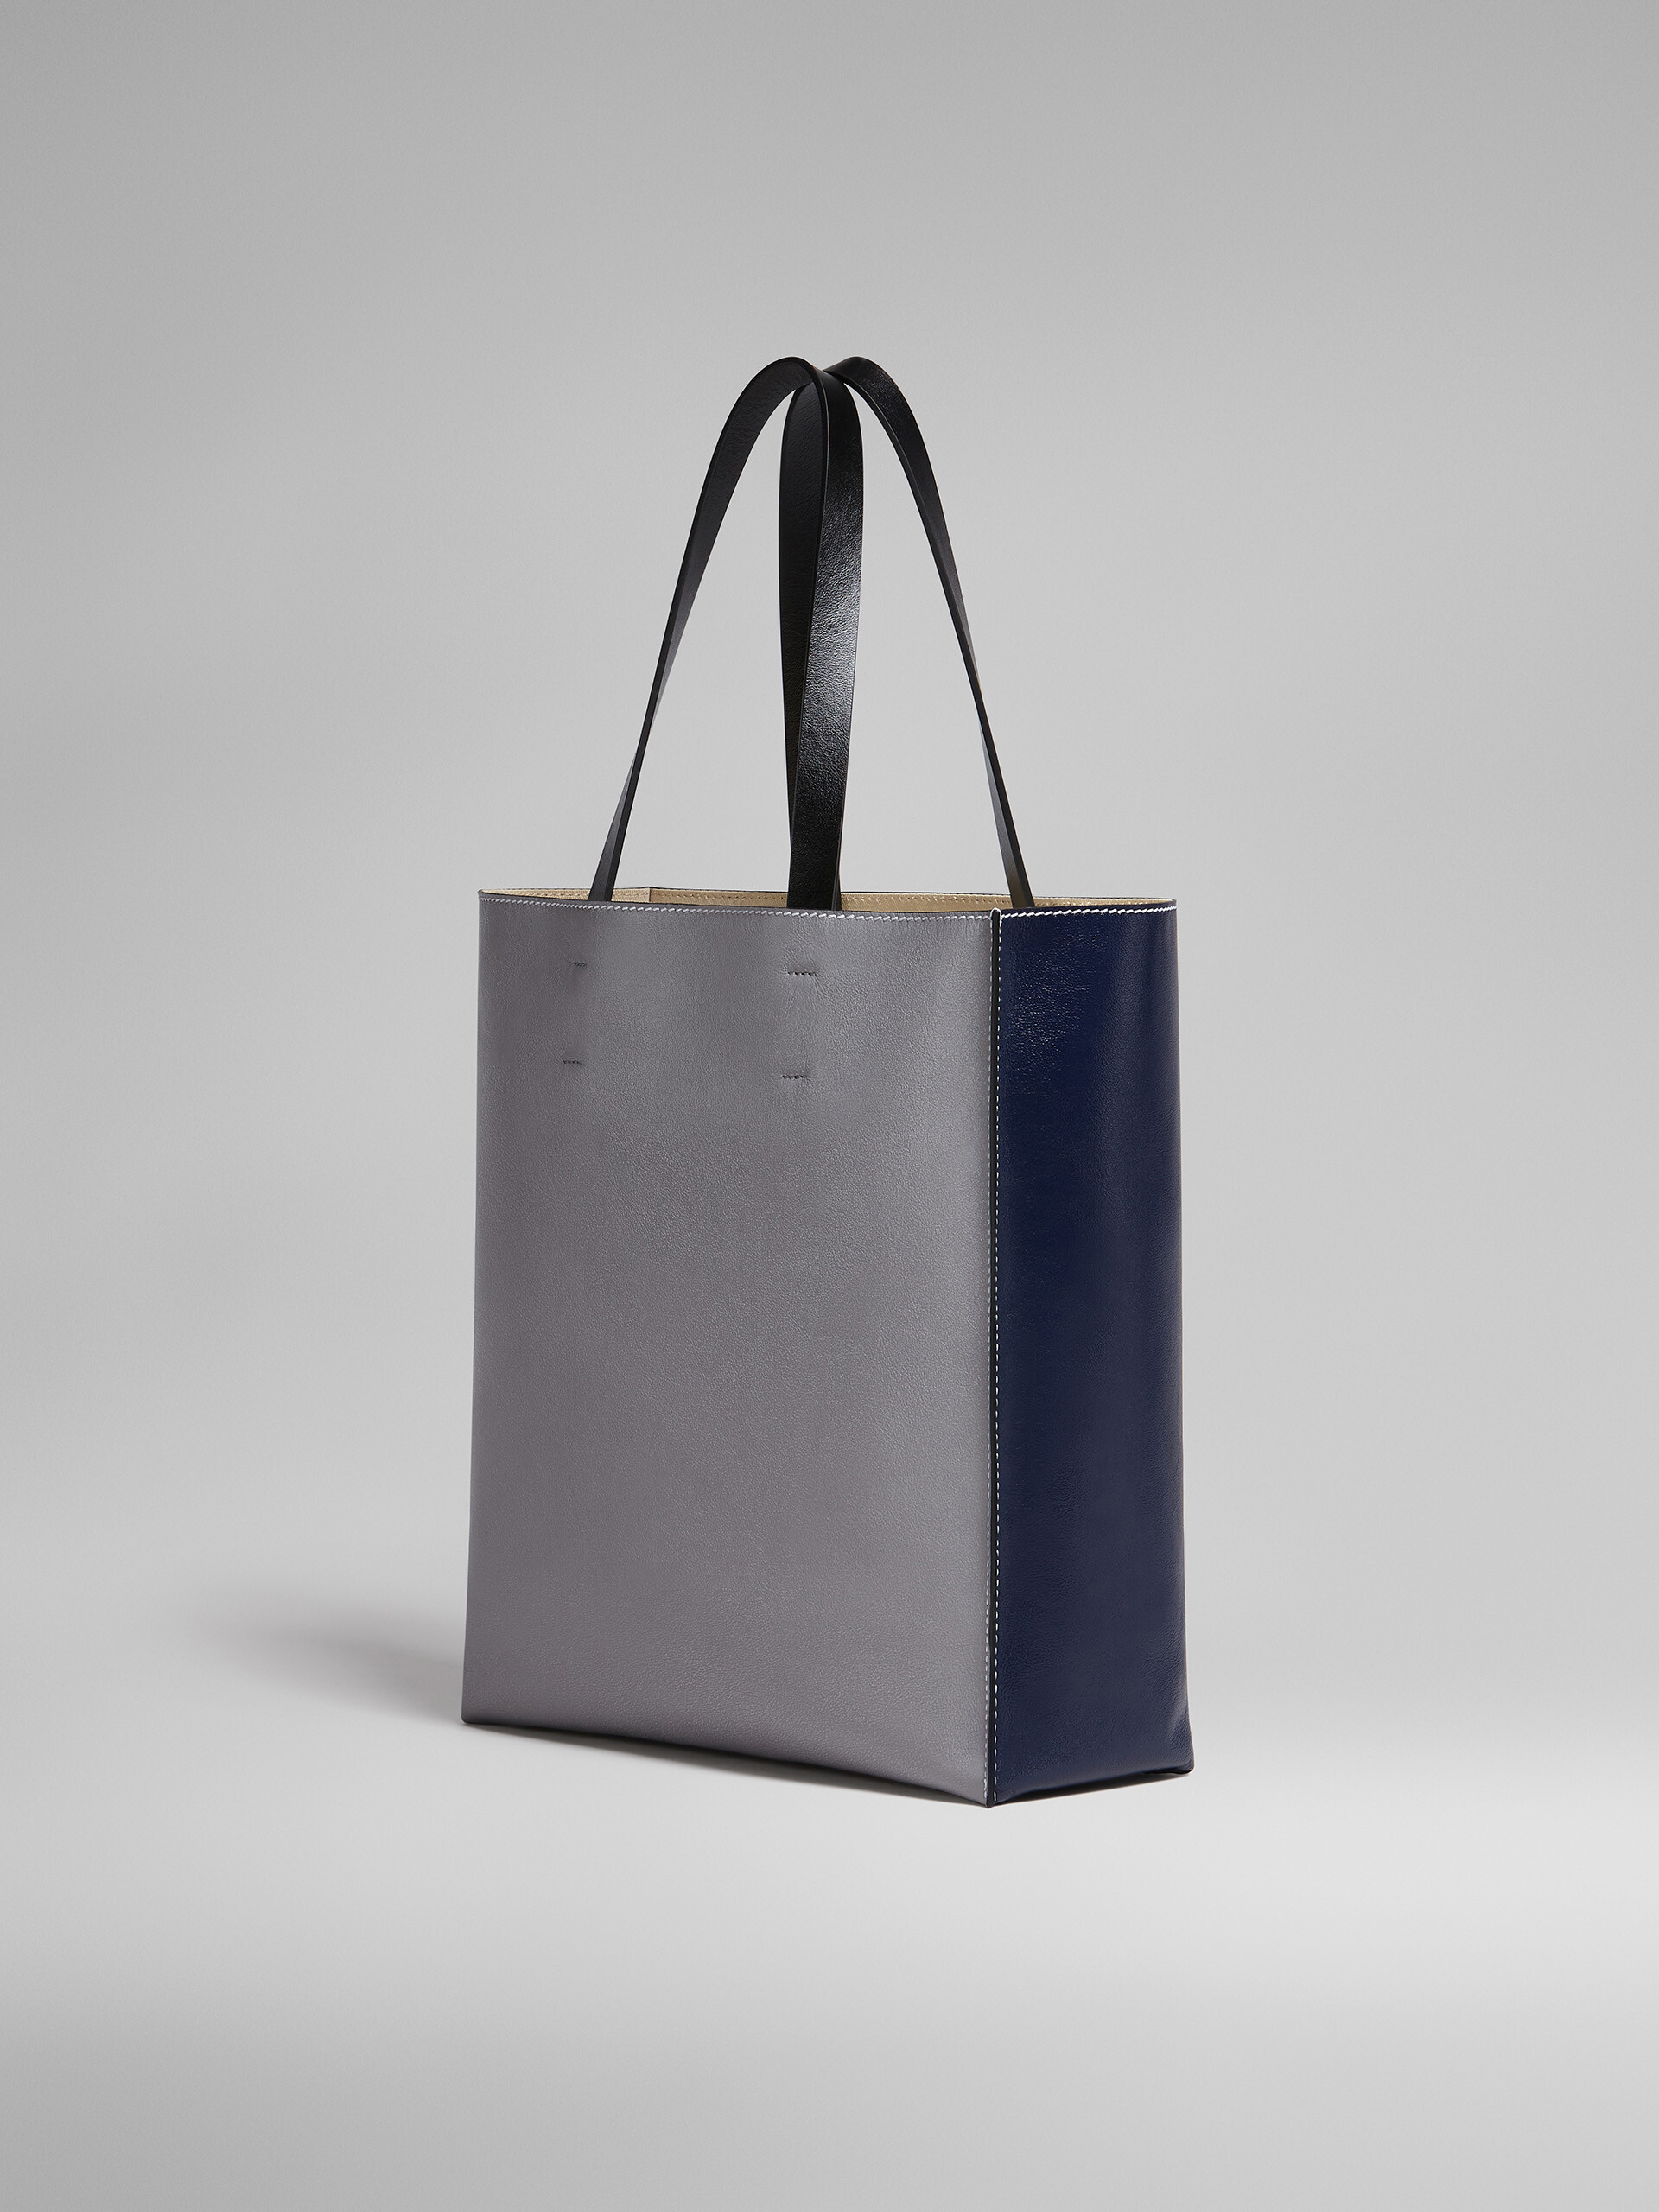 MUSEO SOFT bag grande in pelle bianca - Borse shopping - Image 3